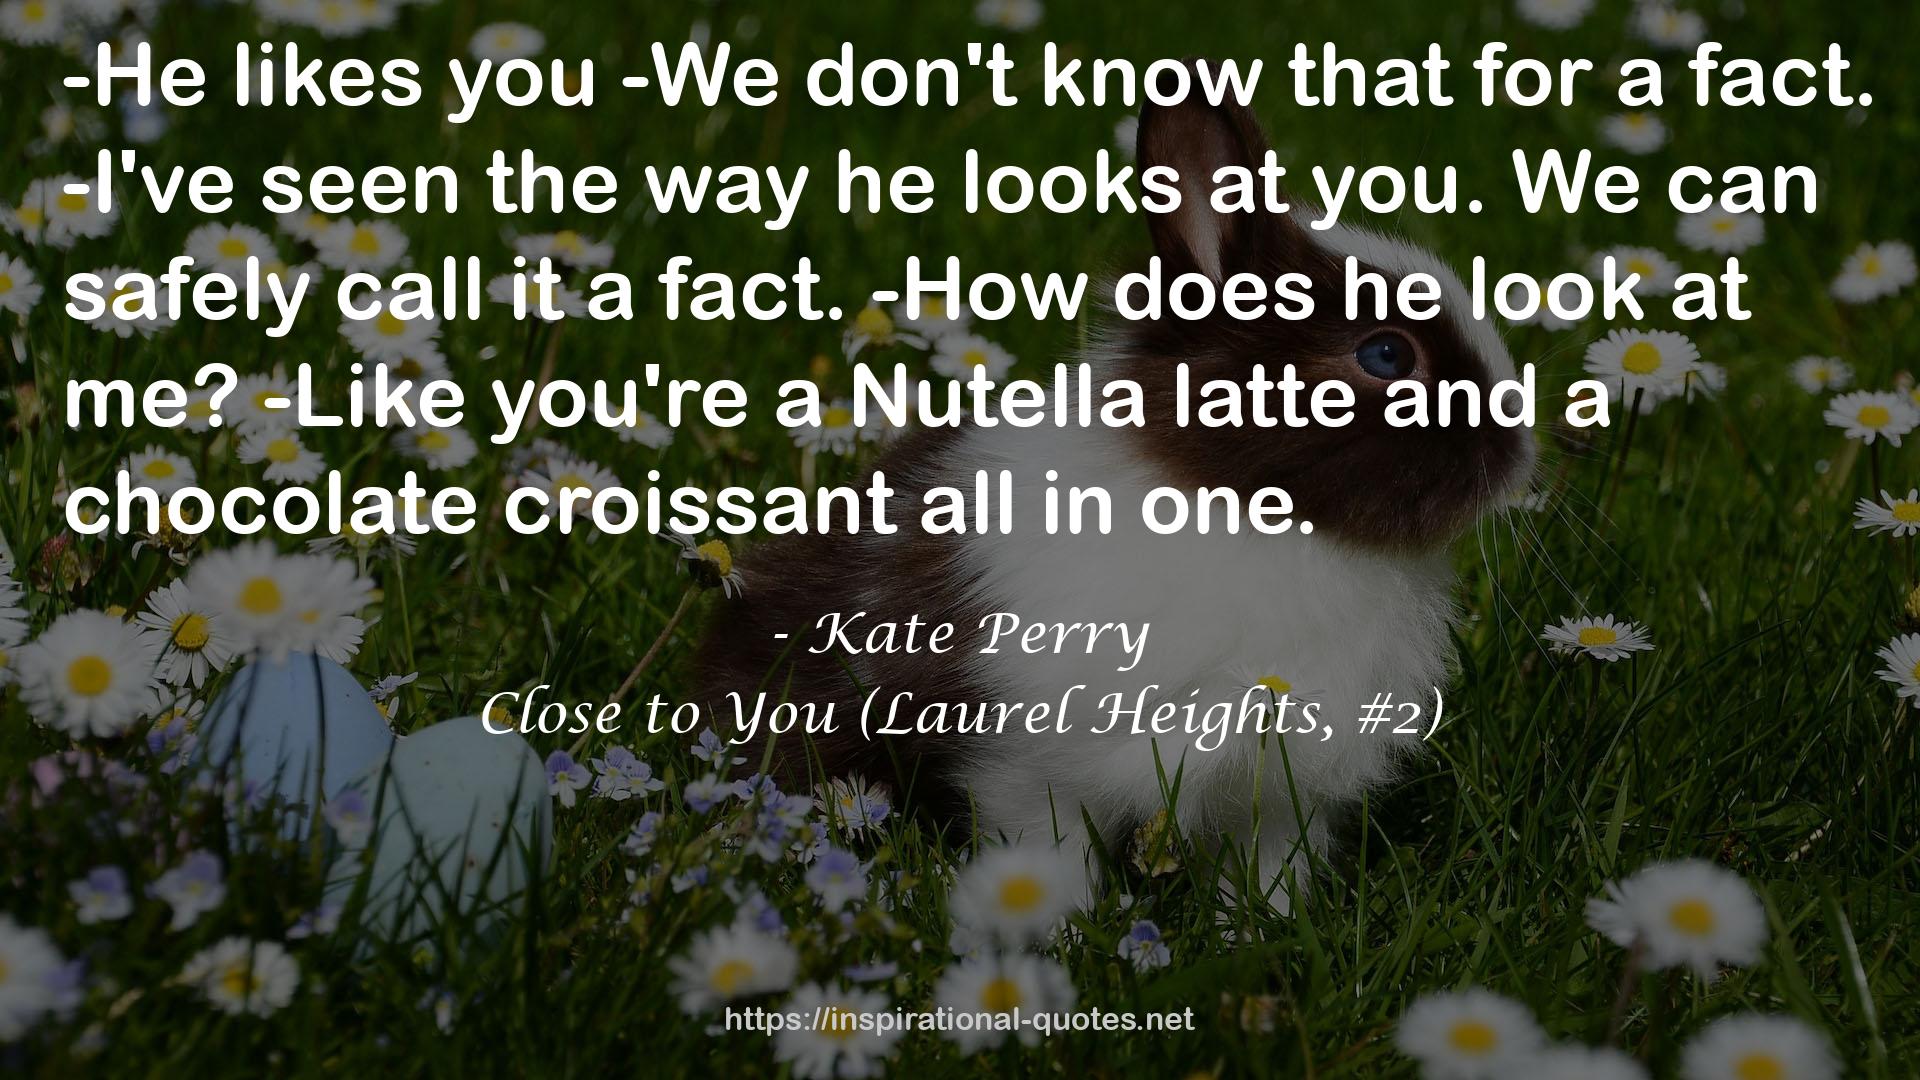 Close to You (Laurel Heights, #2) QUOTES